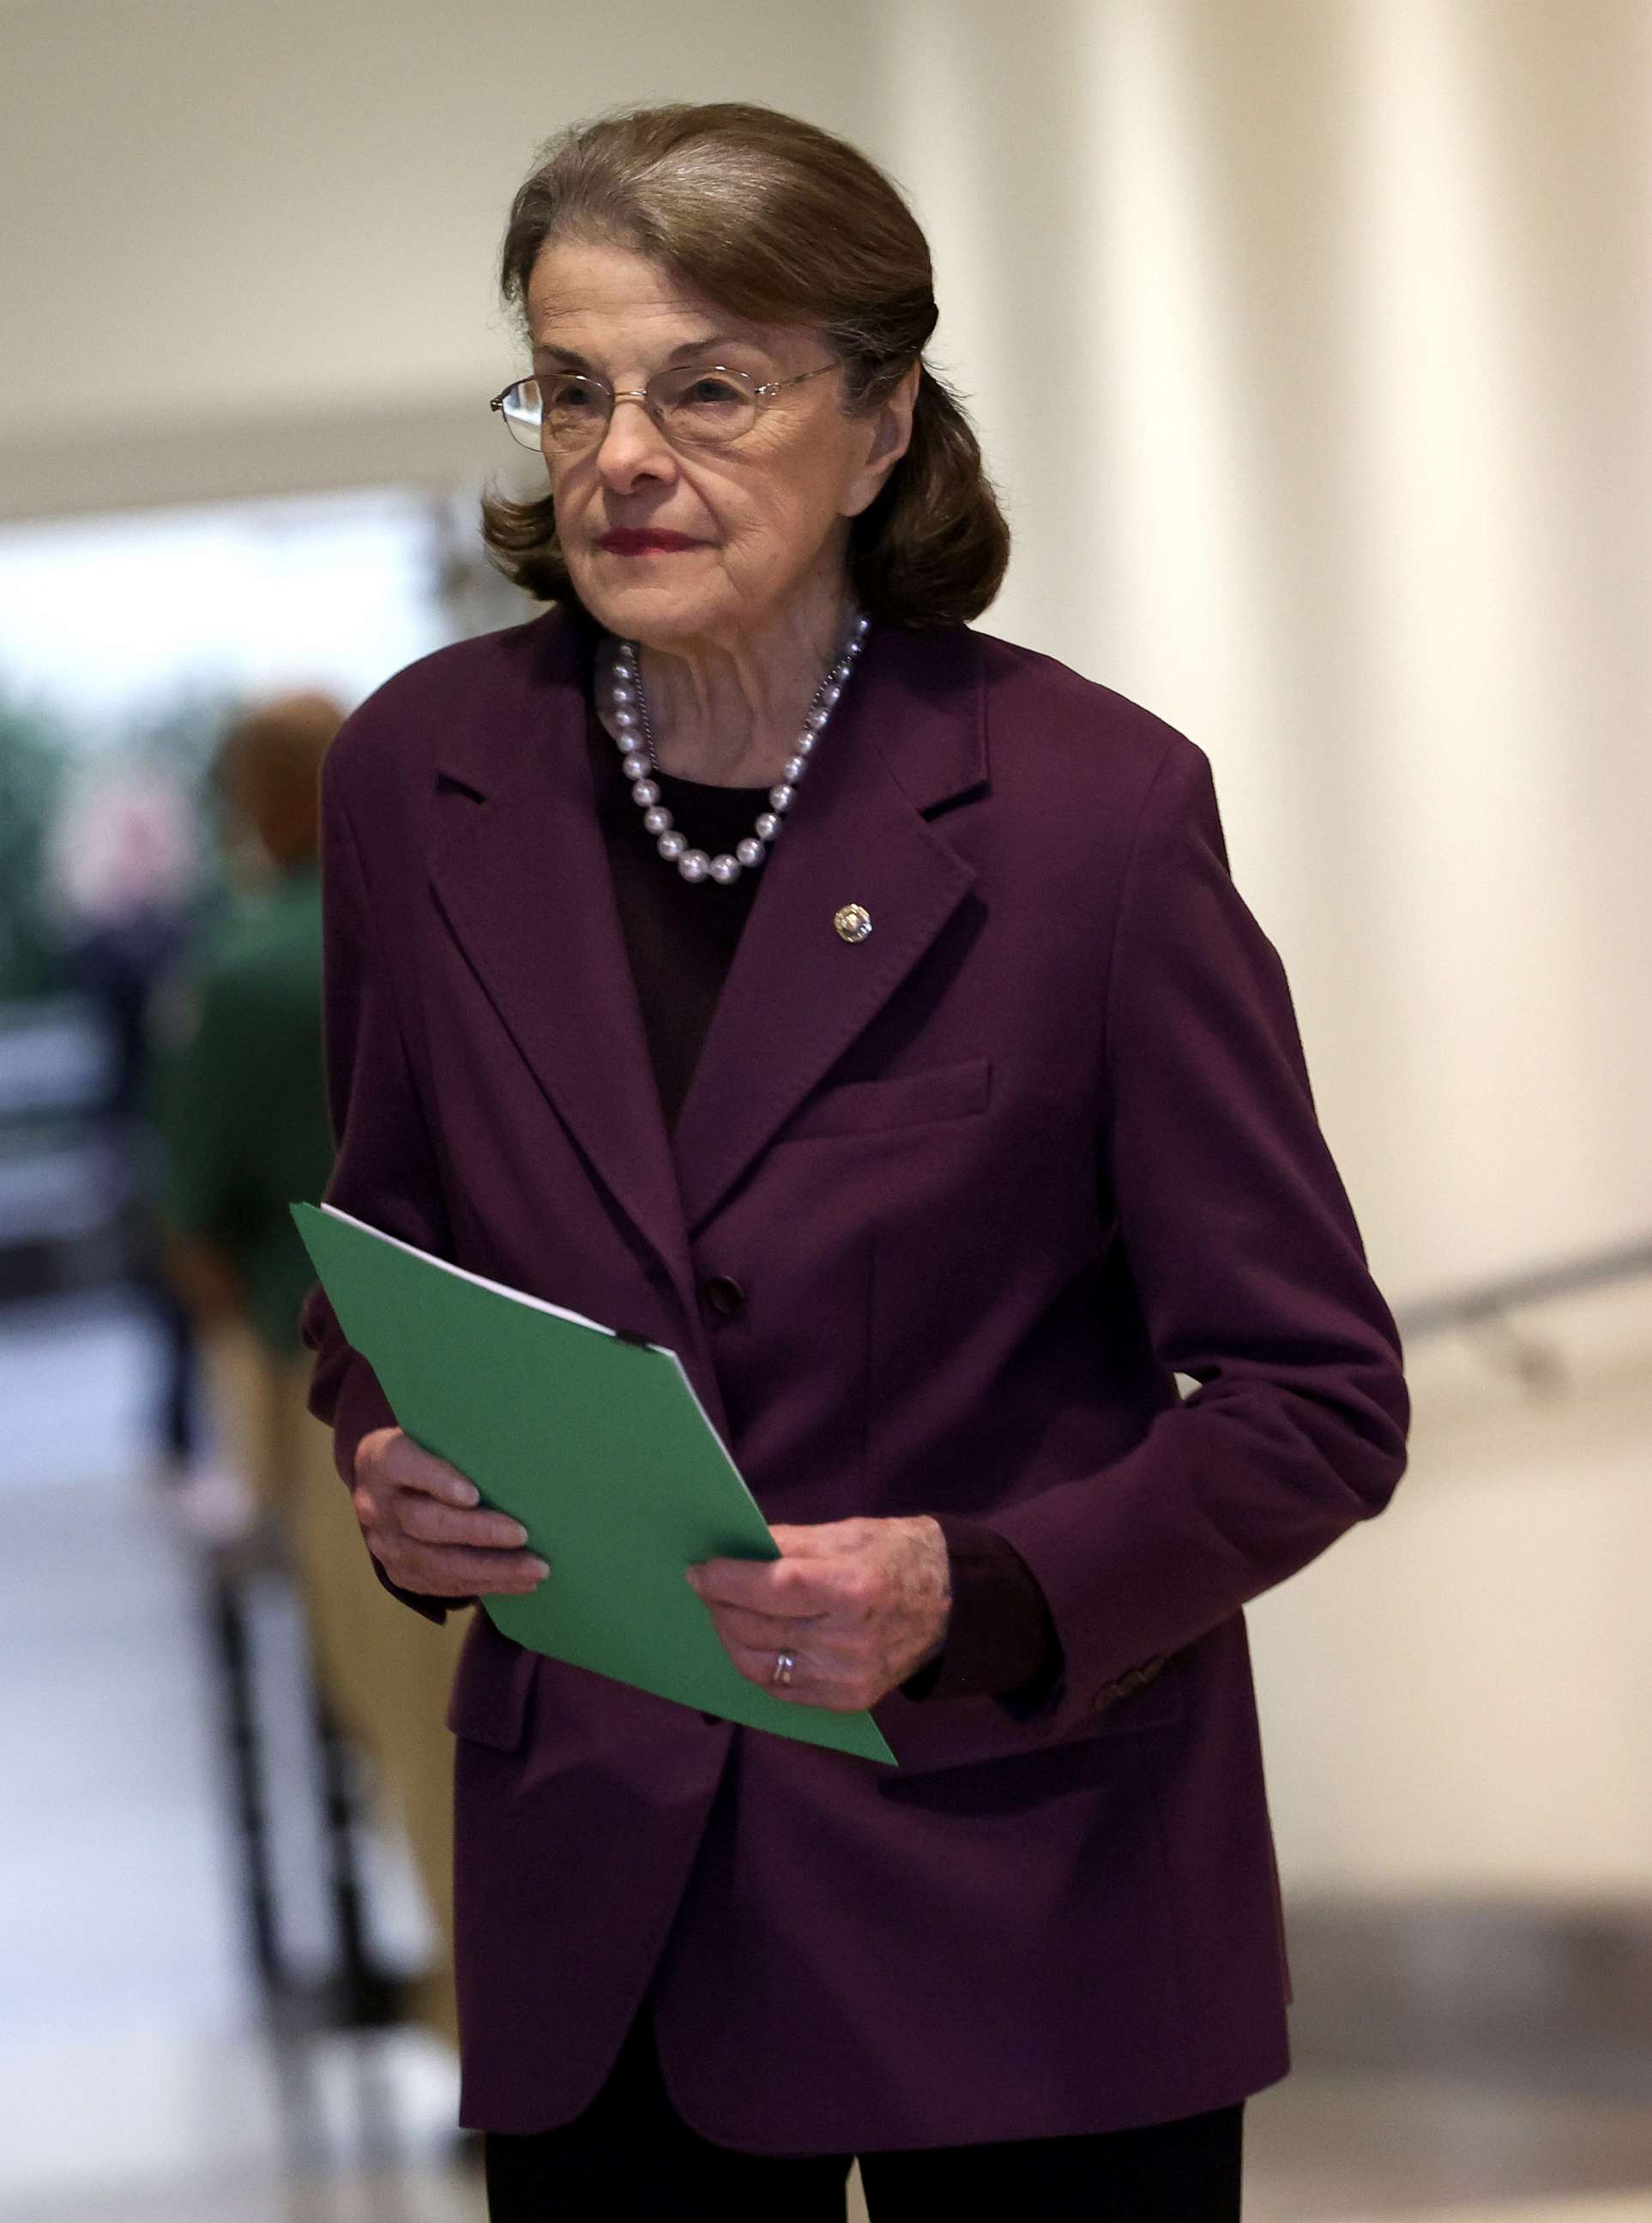 PHOTO: In this Feb. 15, 2023, file photo, Sen. Dianne Feinstein arrives for a Senate briefing at the U.S Capitol in Washington, D.C.